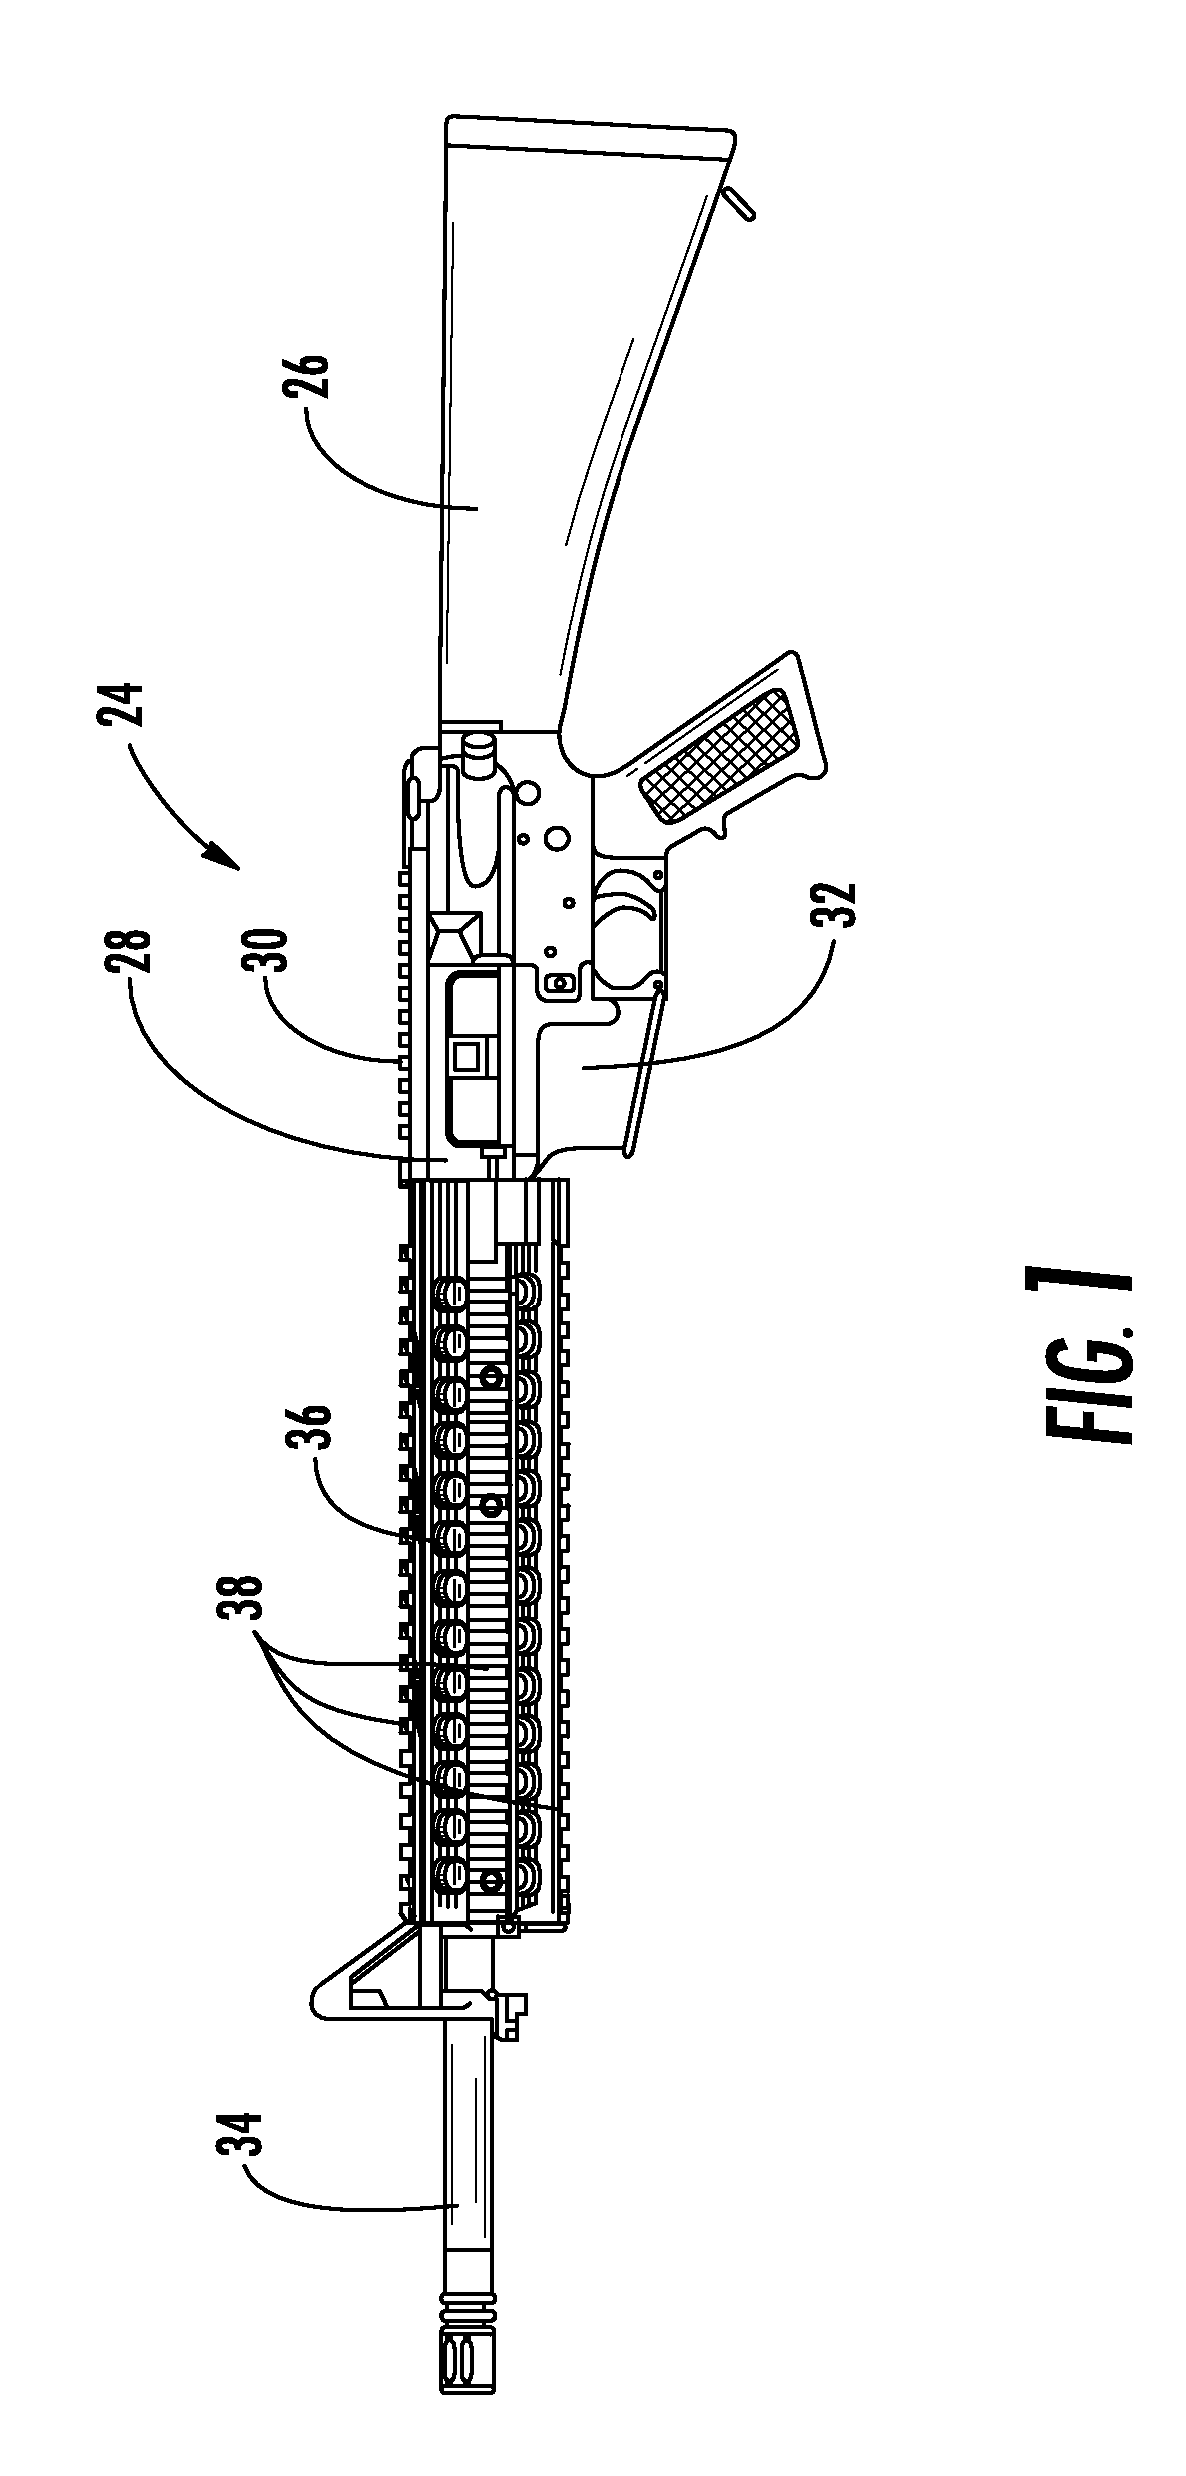 Pivoting mount for a firearm accessory